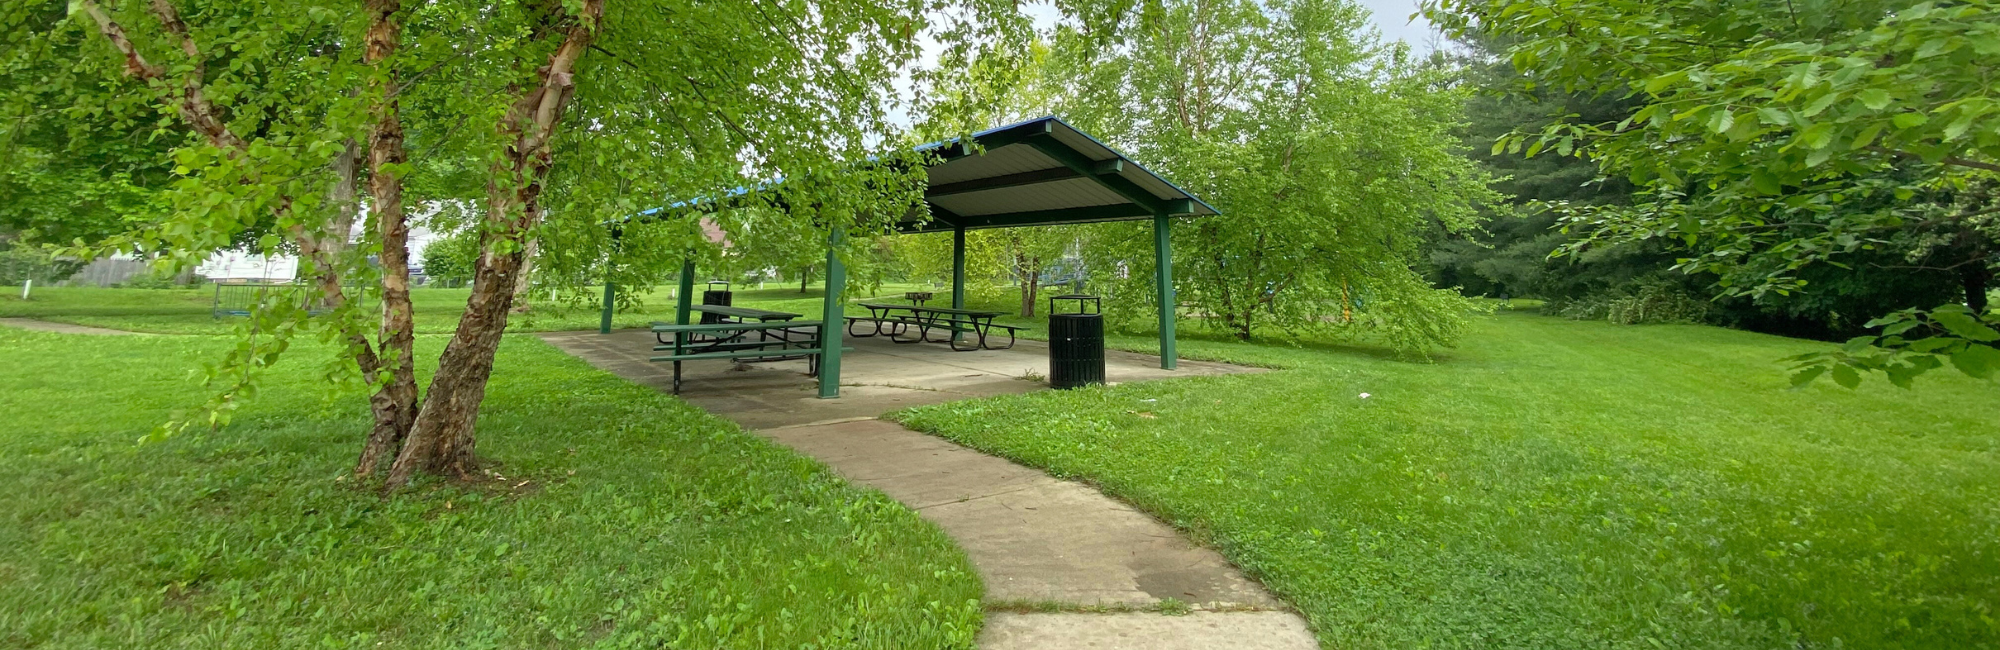 Park with a pathway to a shelter